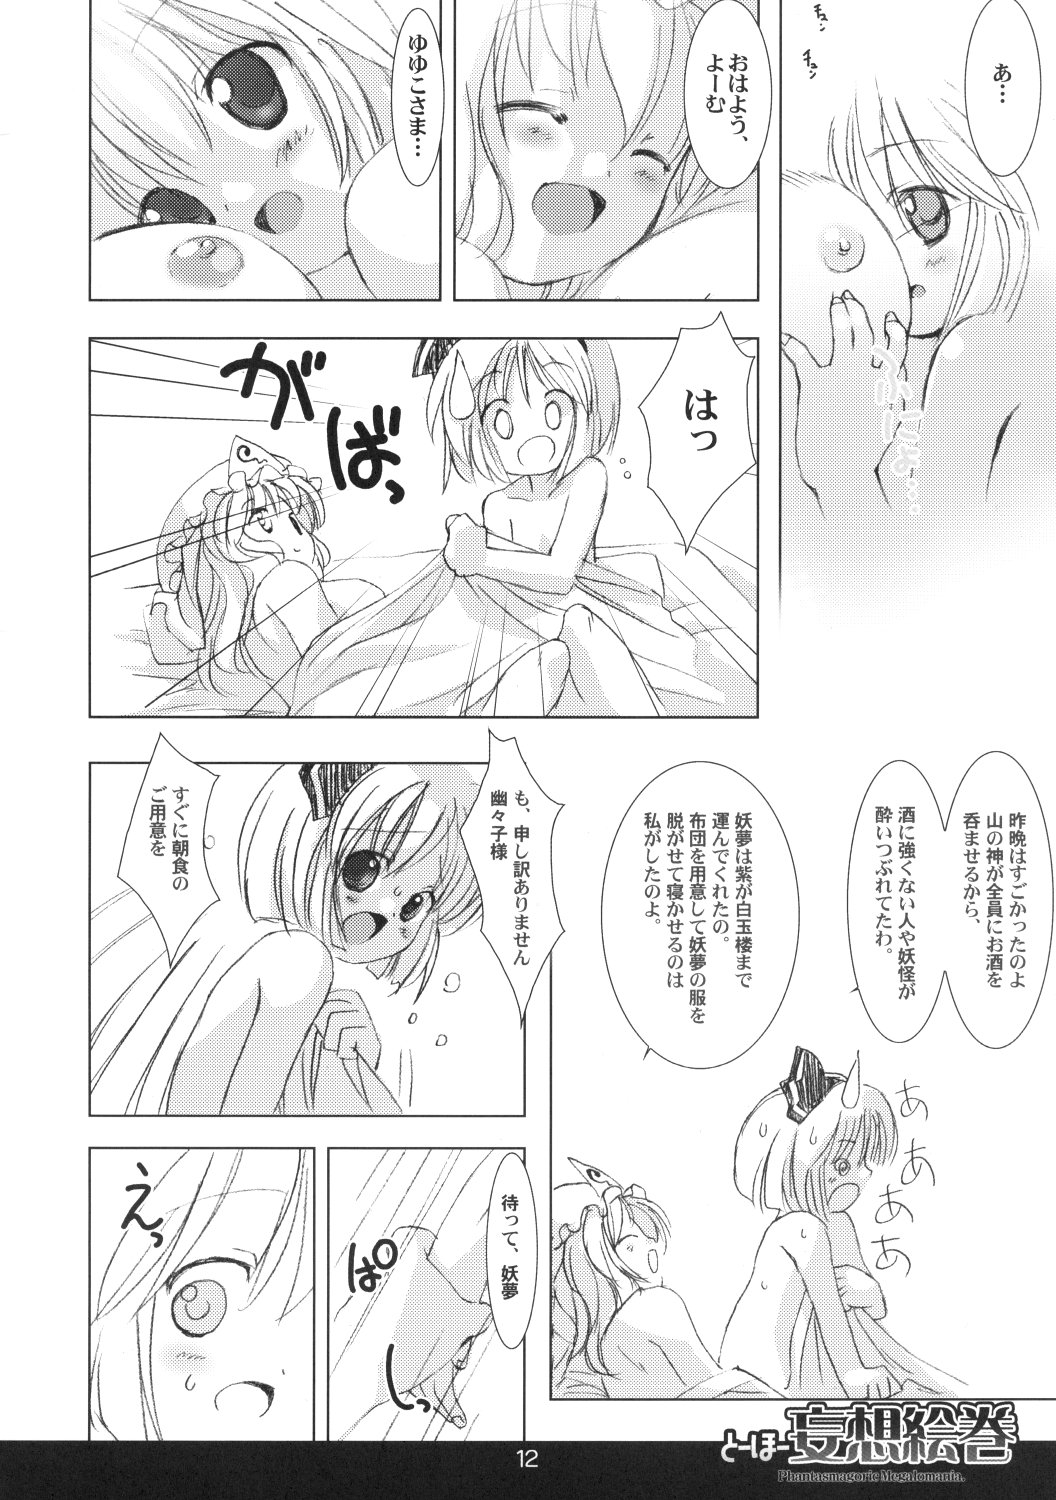 (Reitaisai 5) [MARCY'S (Marcy Dog)] Touhou Mousou Emaki (Touhou Project) page 13 full